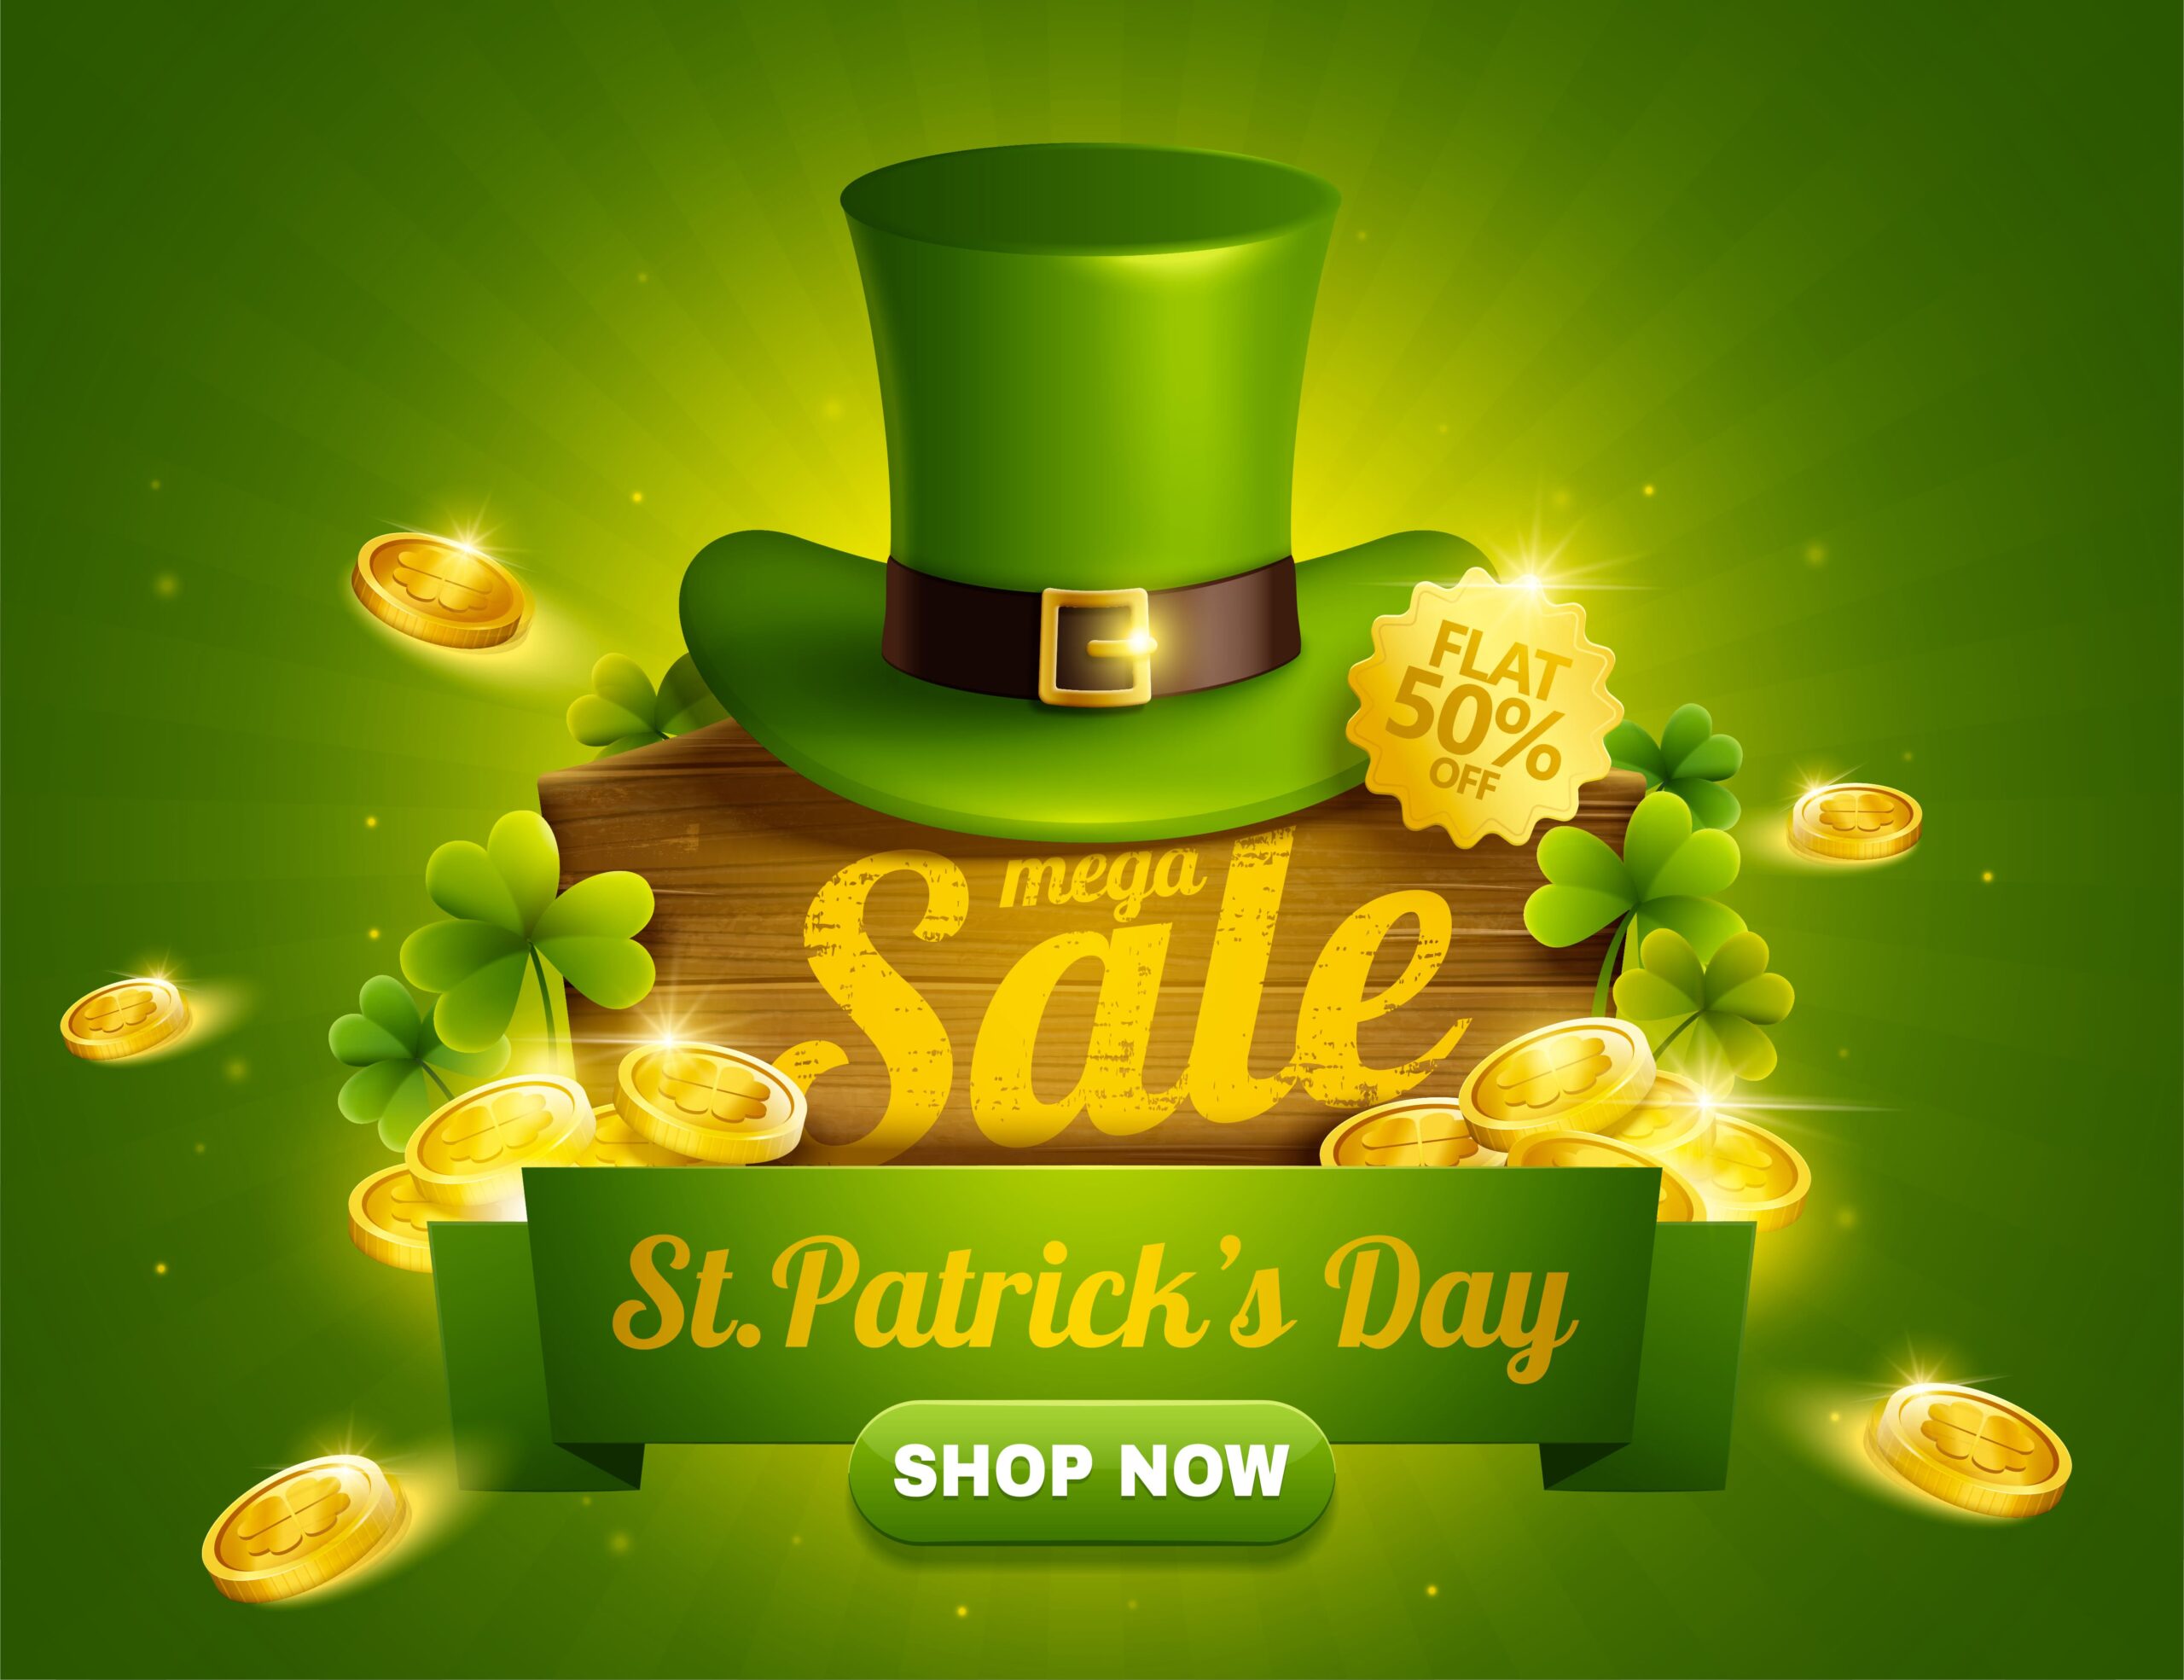 Advertising Tips For Retailers Looking To Cash In On St. Patrick’s Day Min